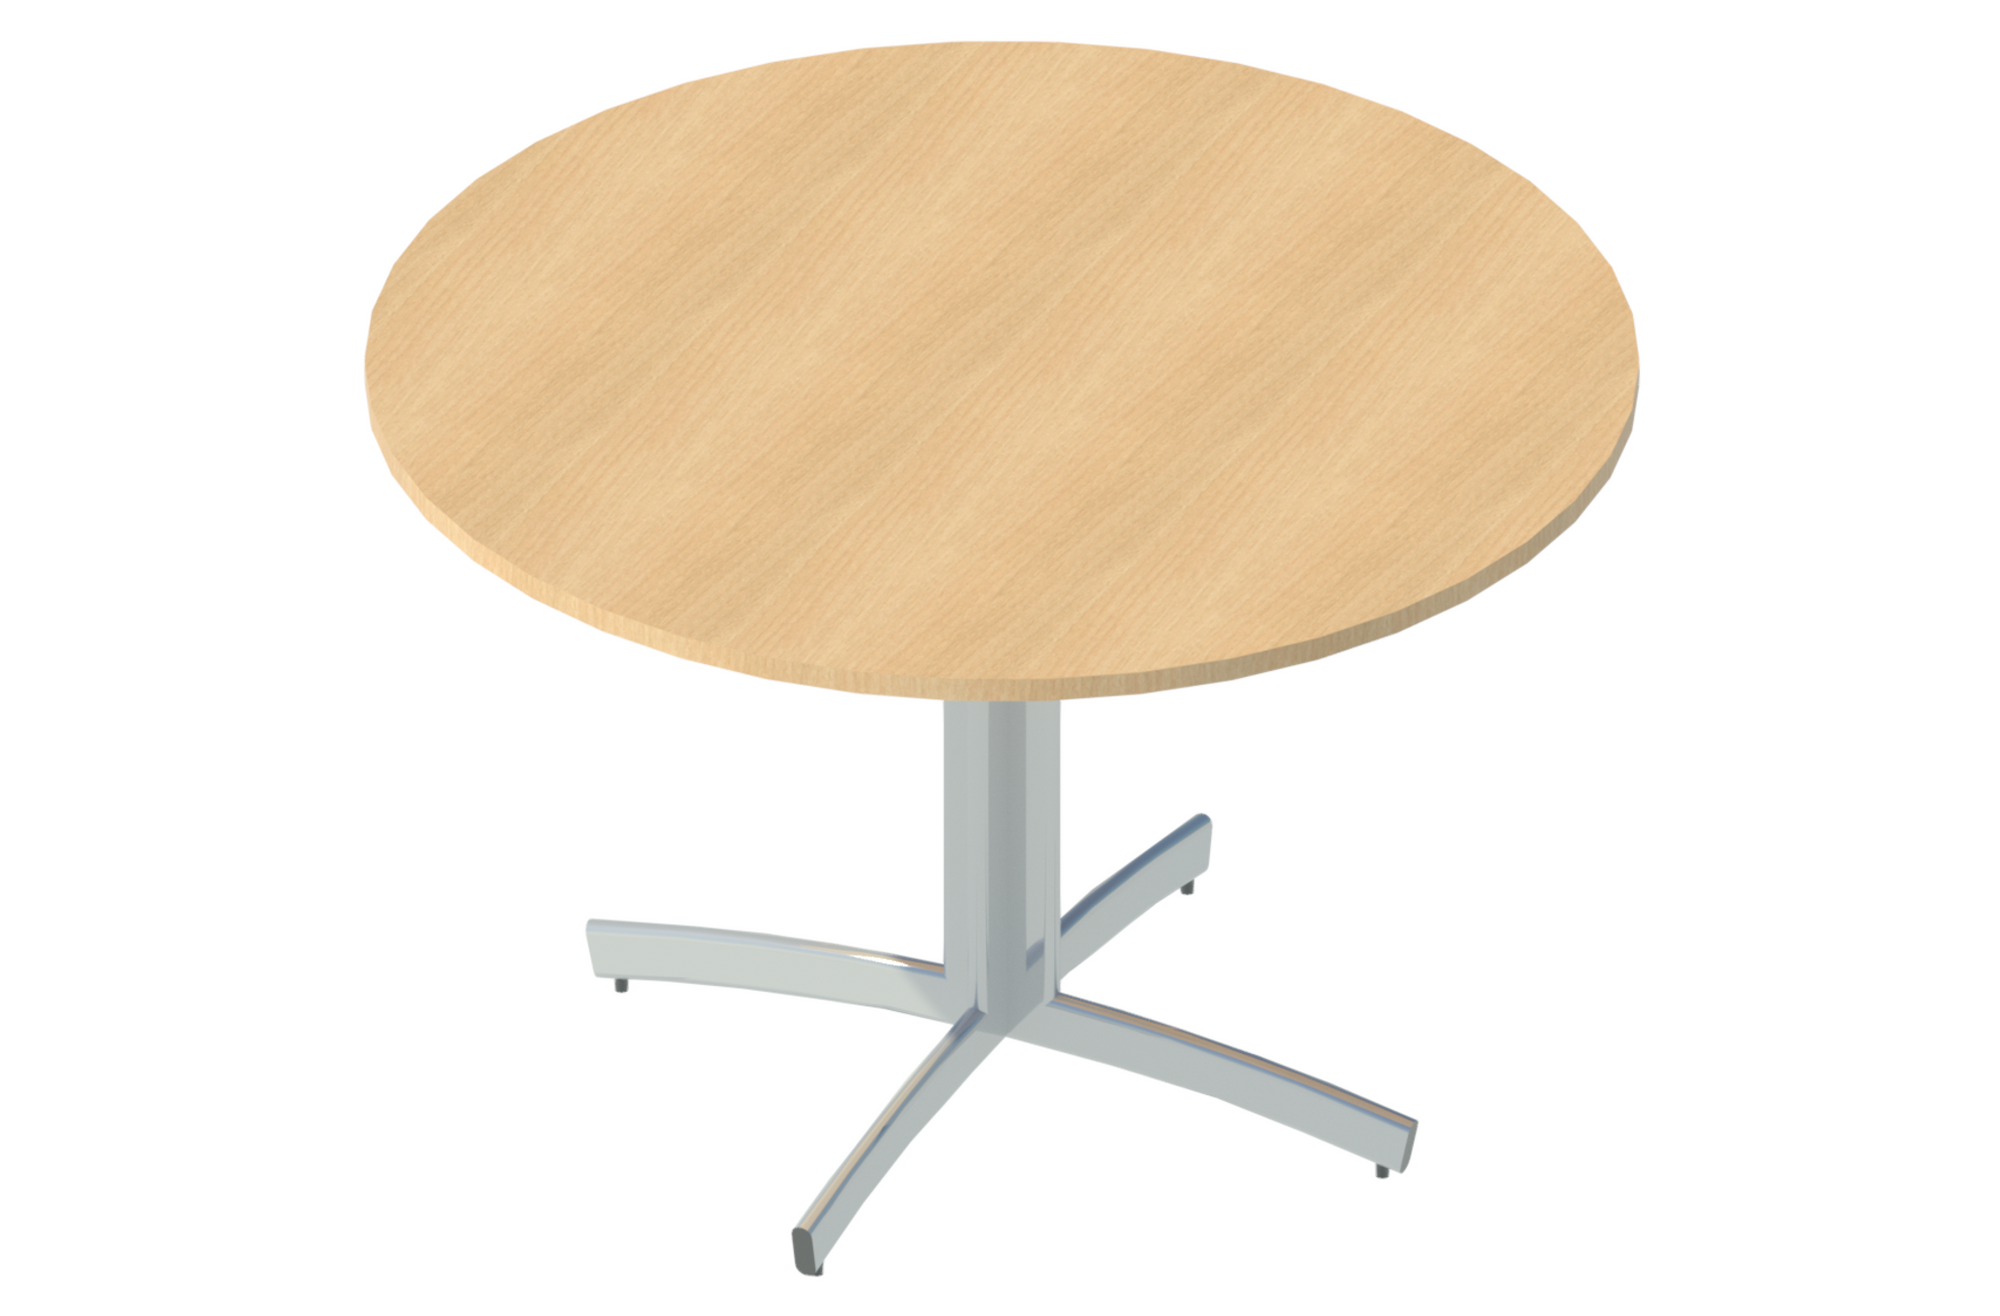 Revit family of round table from AJ Products.